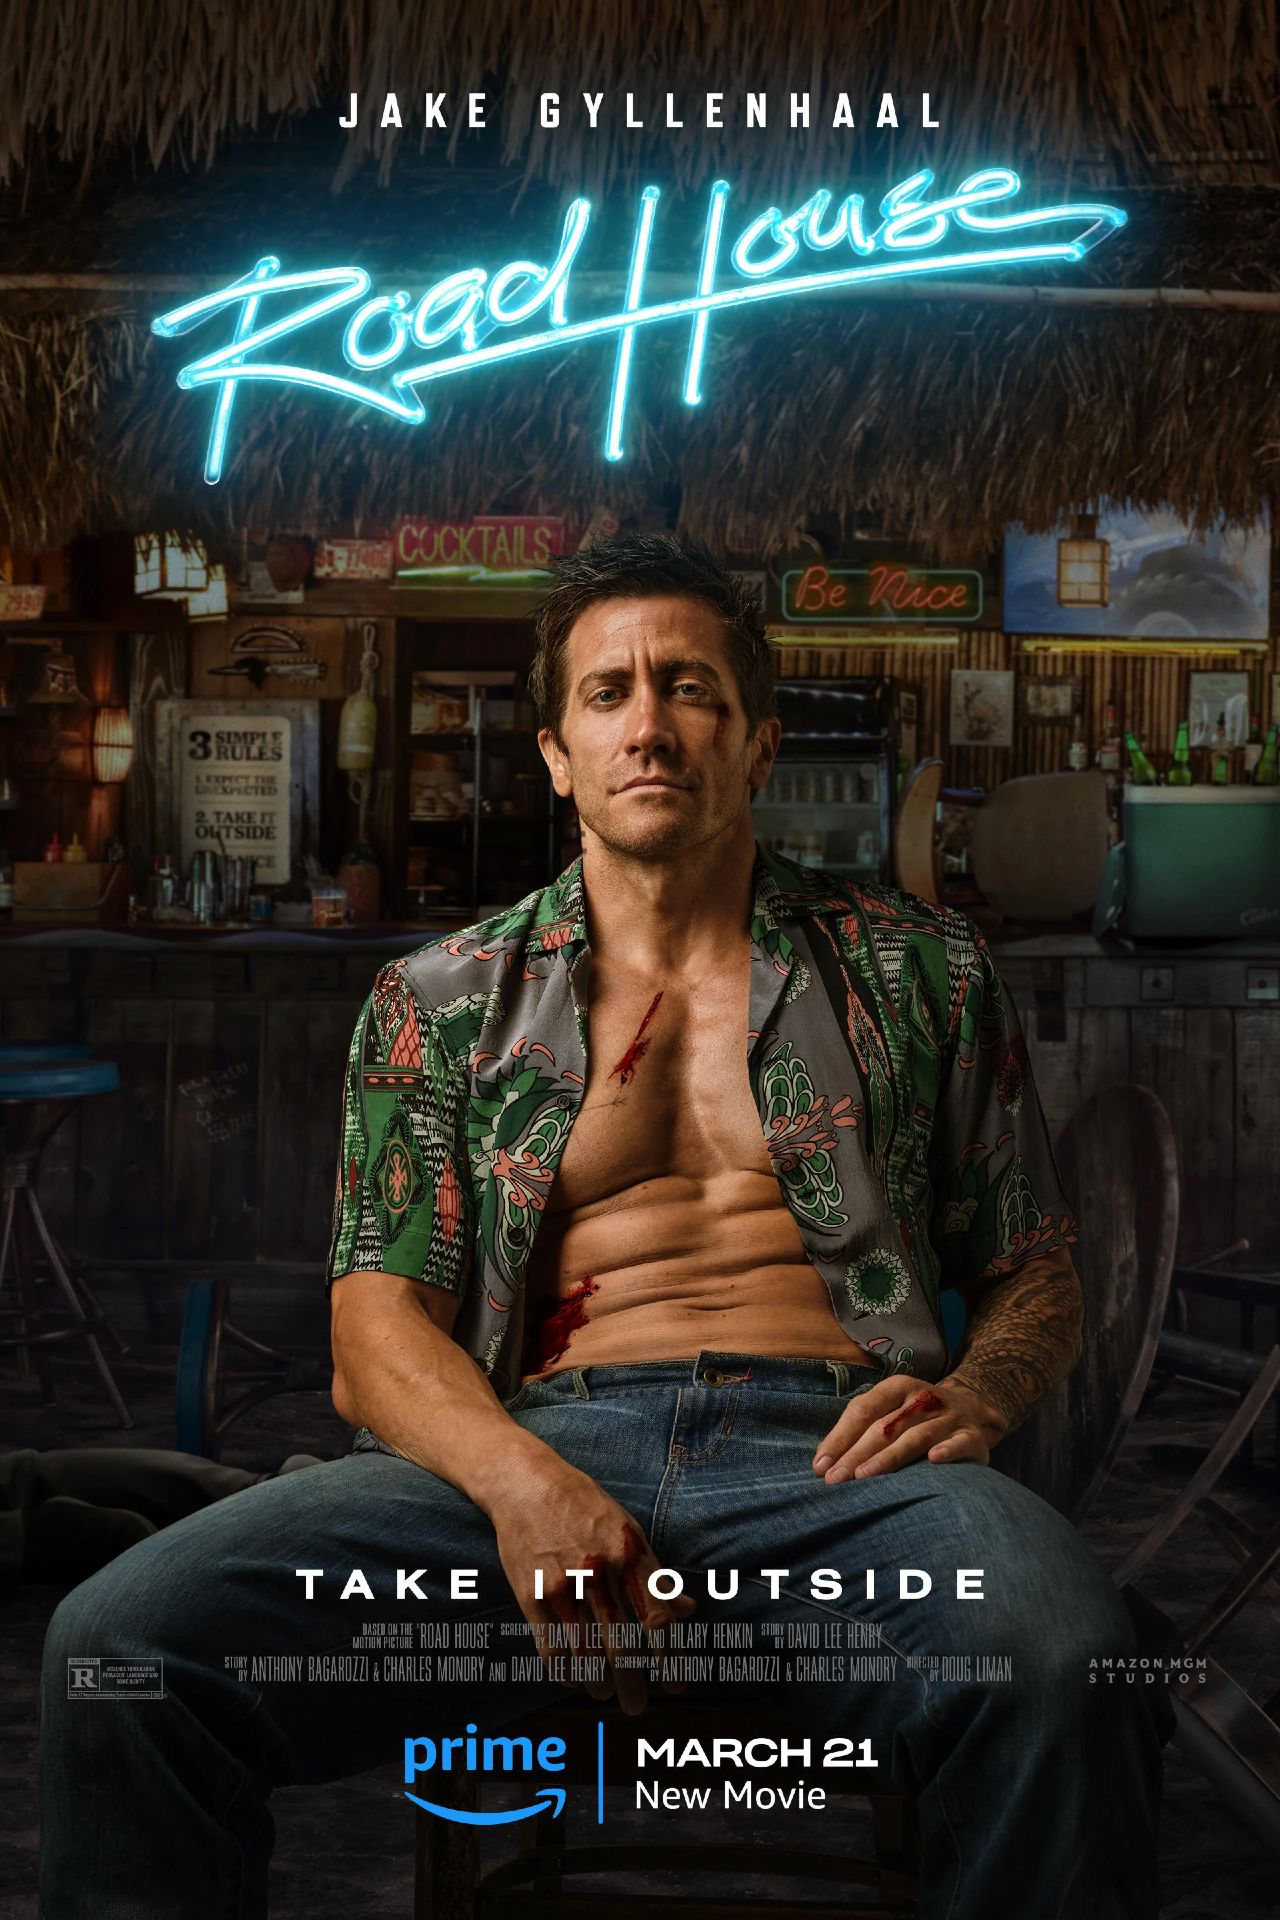 Conor McGregor shares mock-up poster of new Road House movie with Jake  Gyllenhaal 